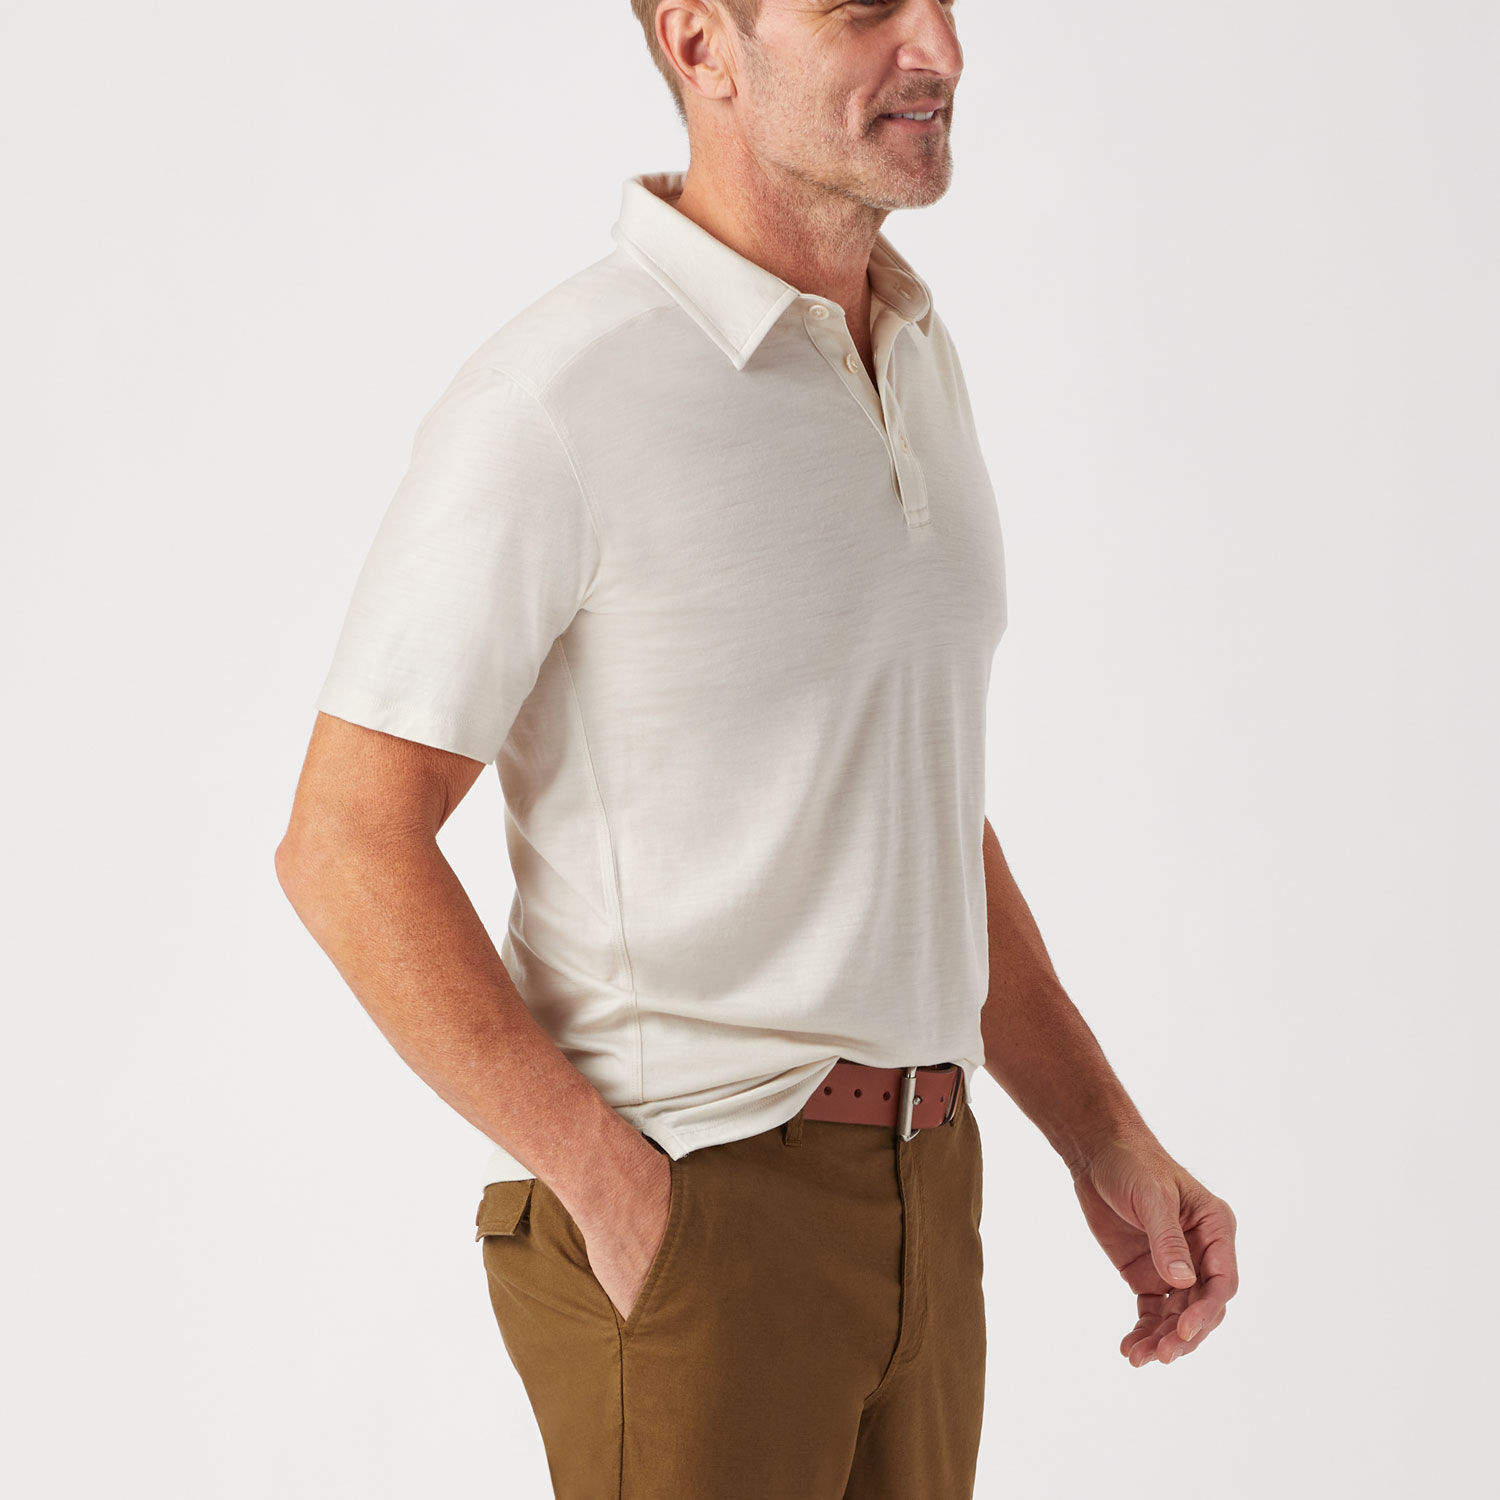 How to wear a polo shirt with jeans  Organic Clothing from Absolutely